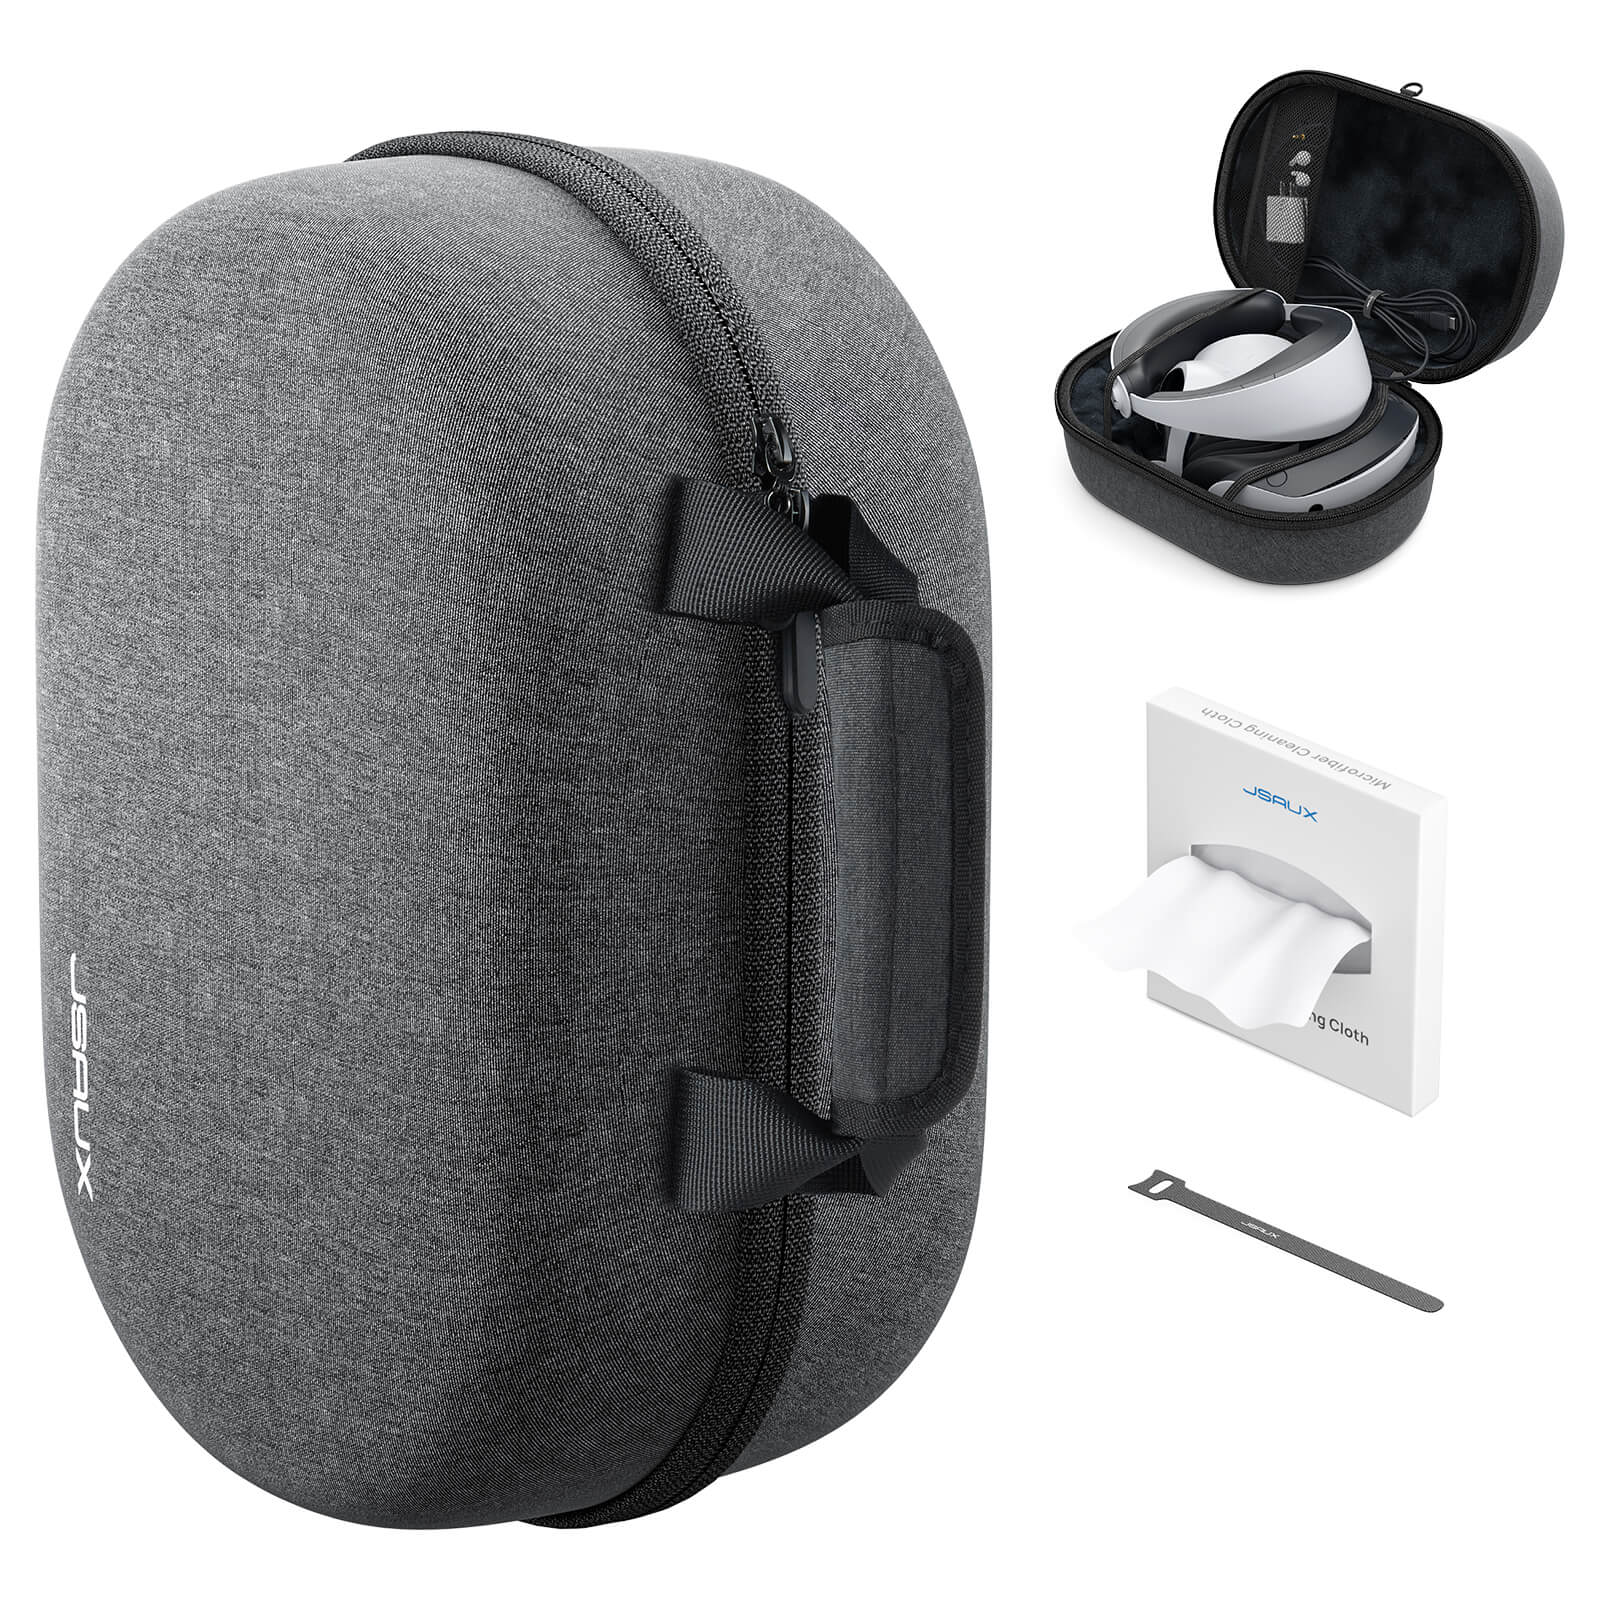 PS VR2 Carrying Case#style_bg0109a